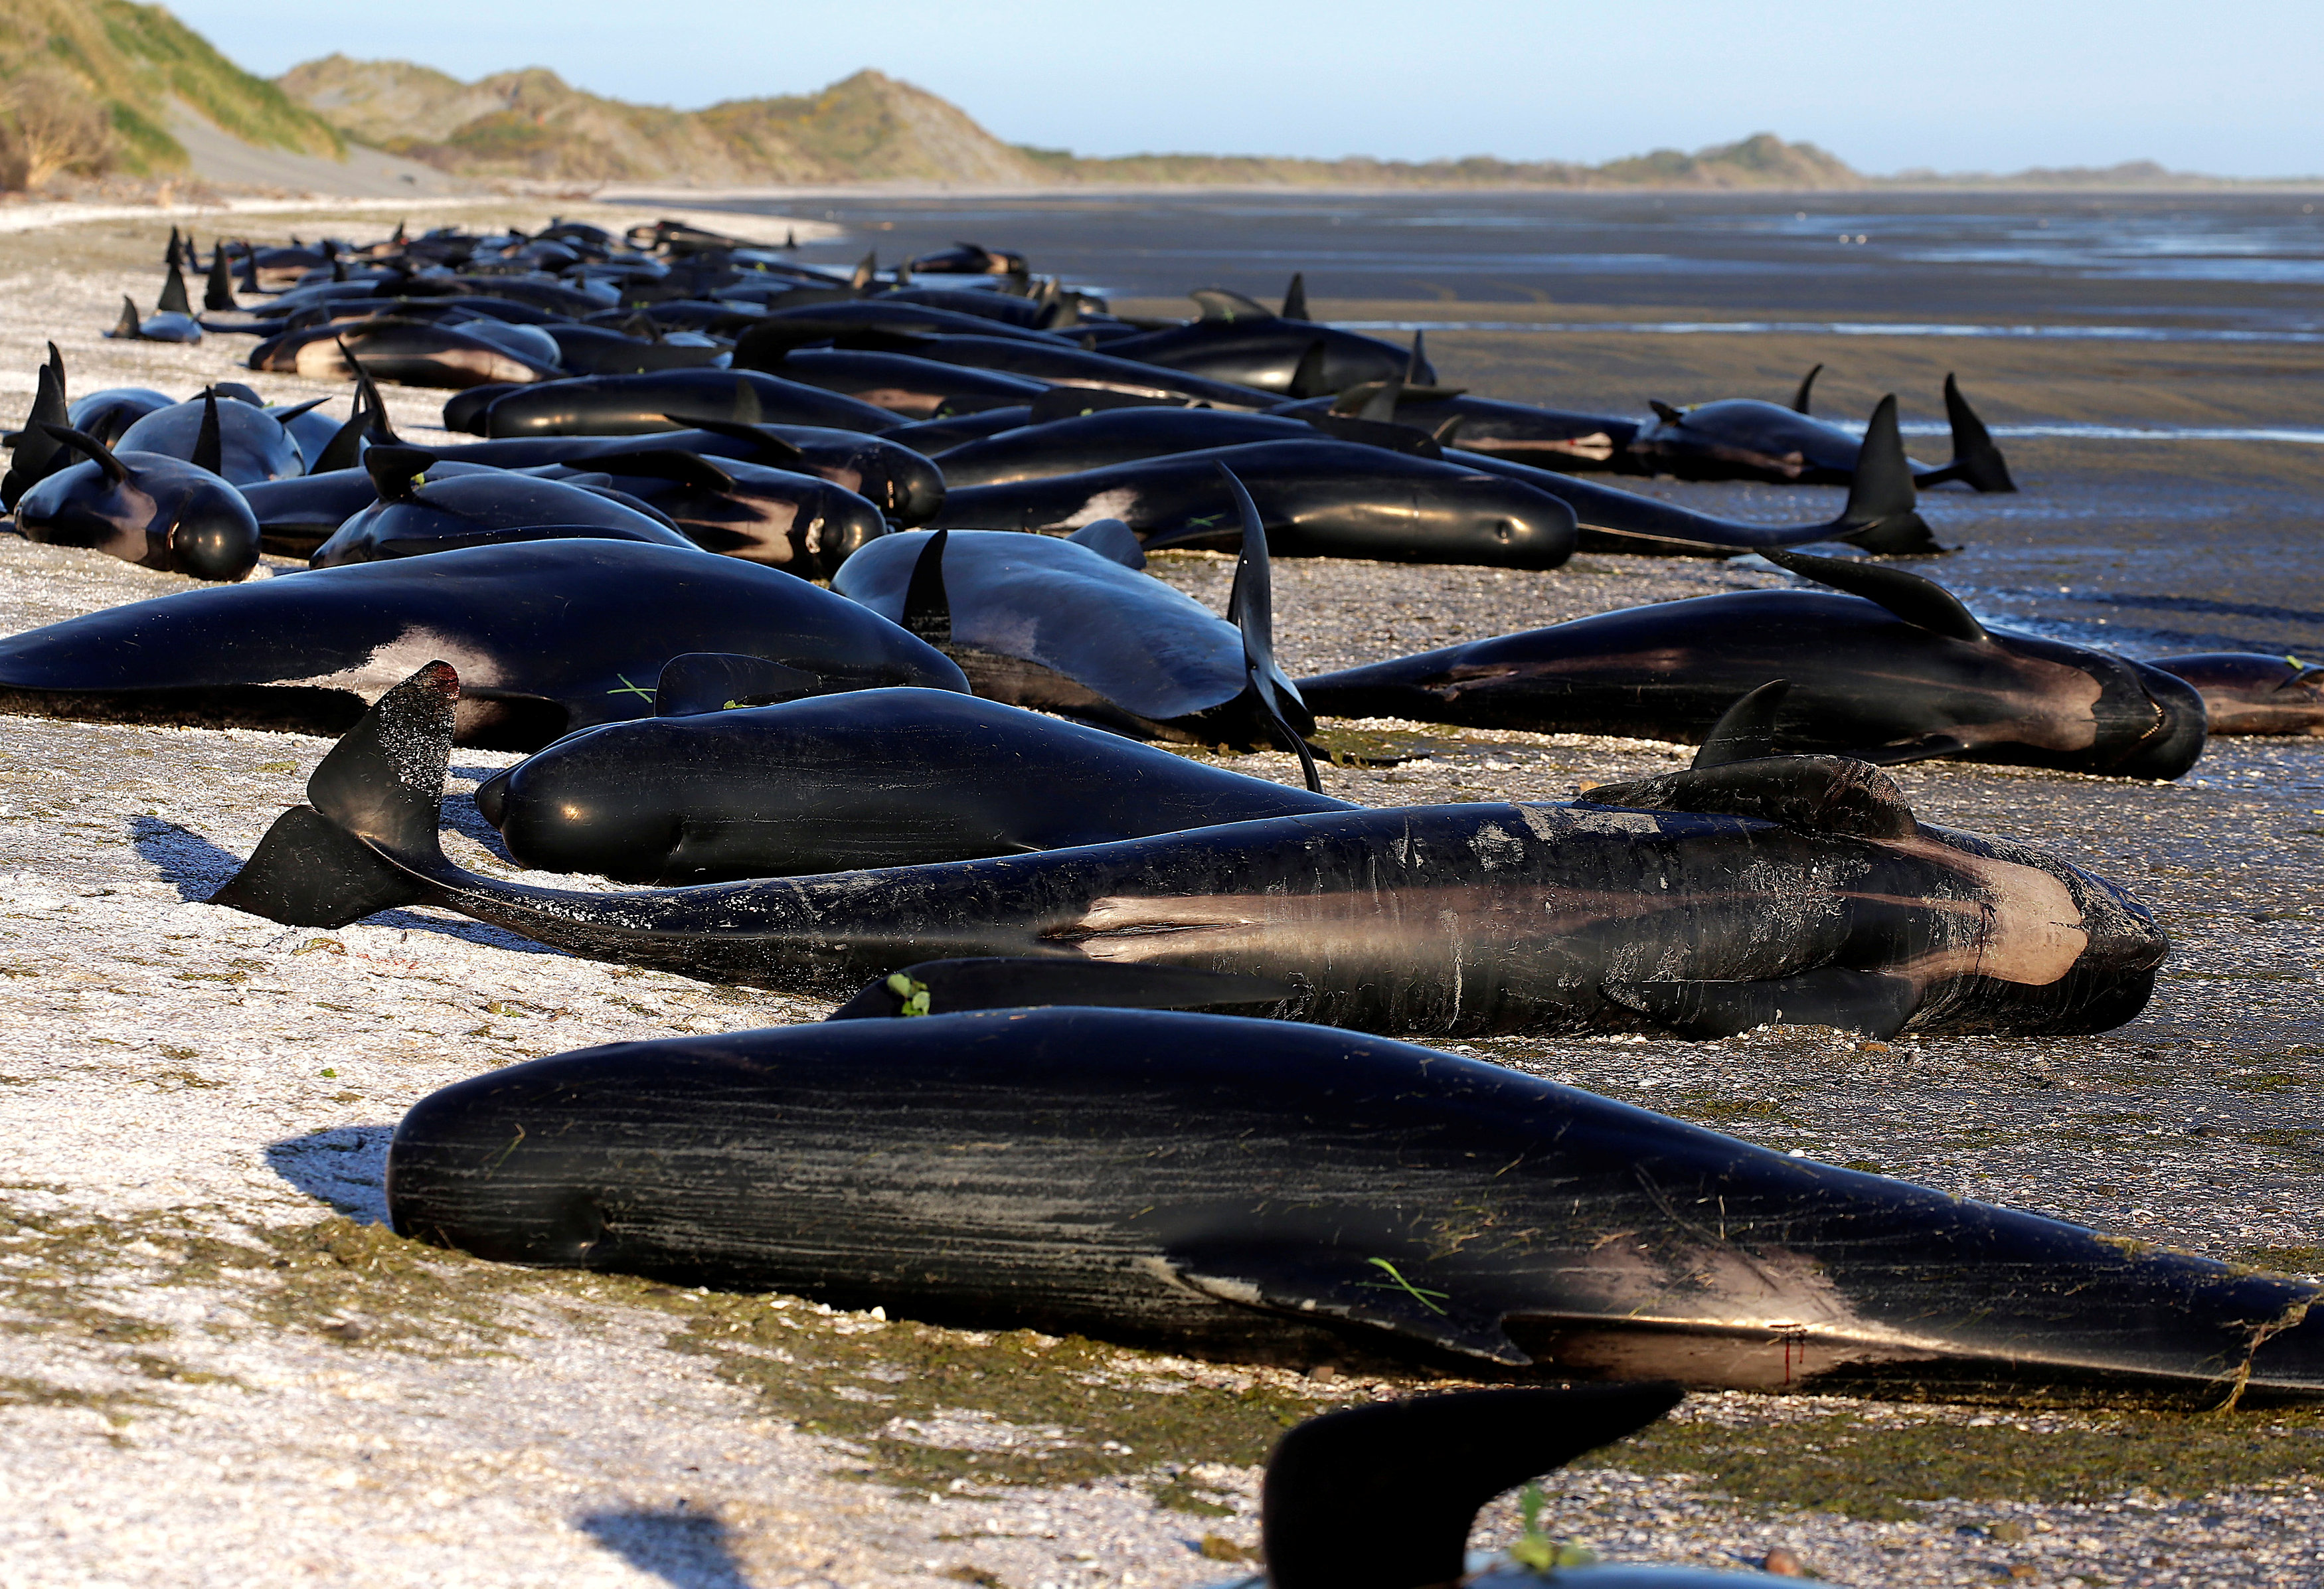 Some of the hundreds of stranded pilot whales marked with an 'X' to indicate they have died can be seen together after one of the country's largest recorded mass whale strandings, in Golden Bay, at the top of New Zealand's South Island, February 10, 2017. REUTERS/Anthony Phelps